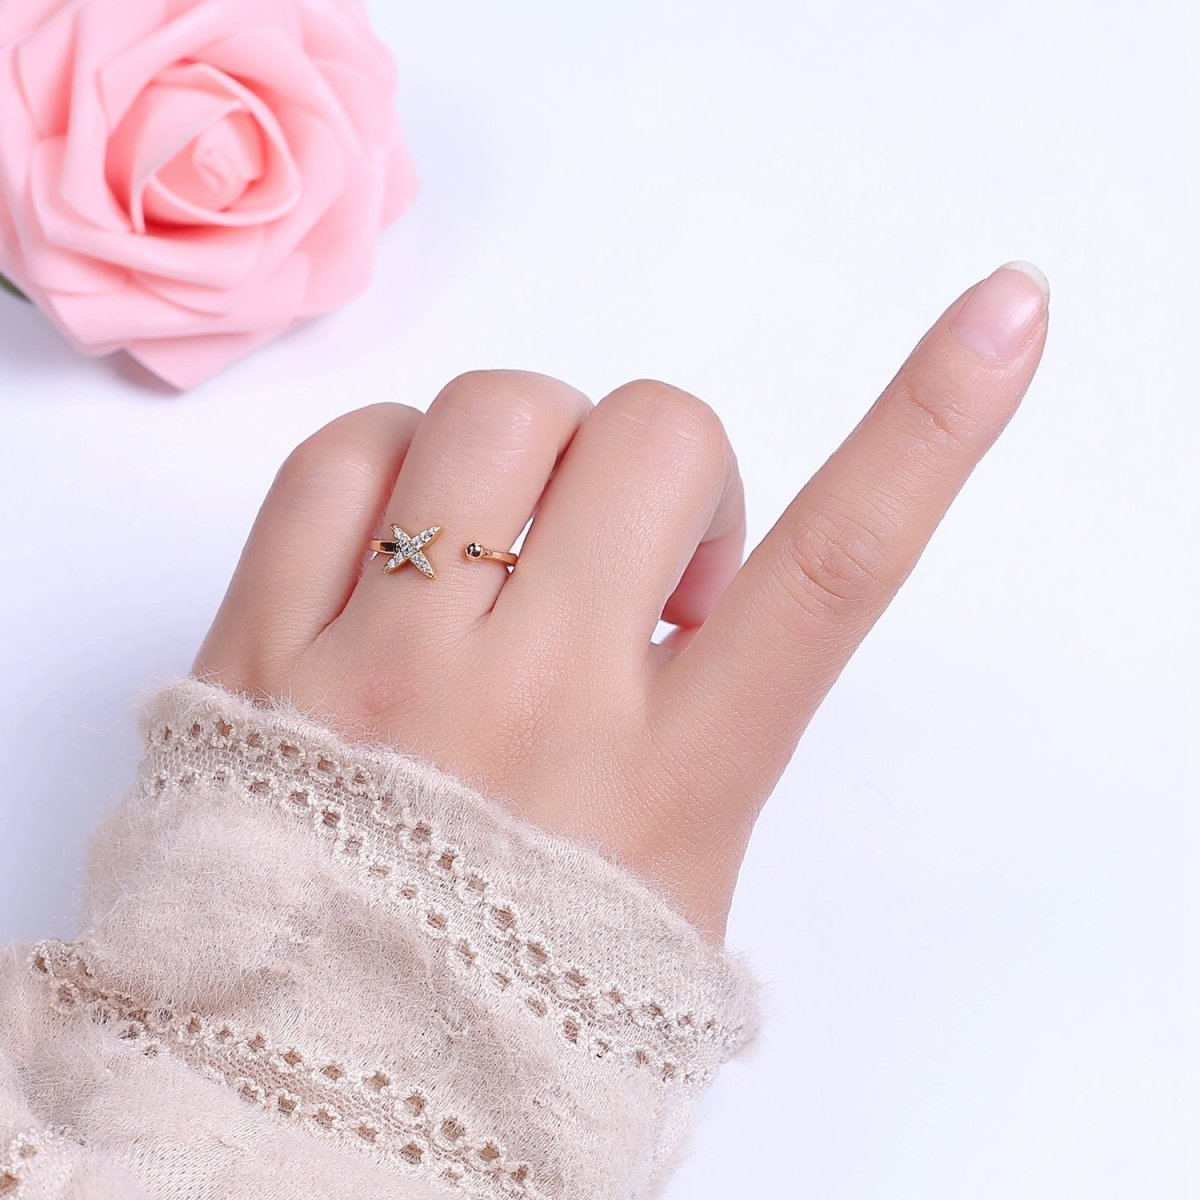 Dainty Star Ring - Minimalist Ring - Celestial Jewelry Stacking Rings Thin Gold Filled Band Ring Open Adjustable Jewelry S-518 - DLUXCA